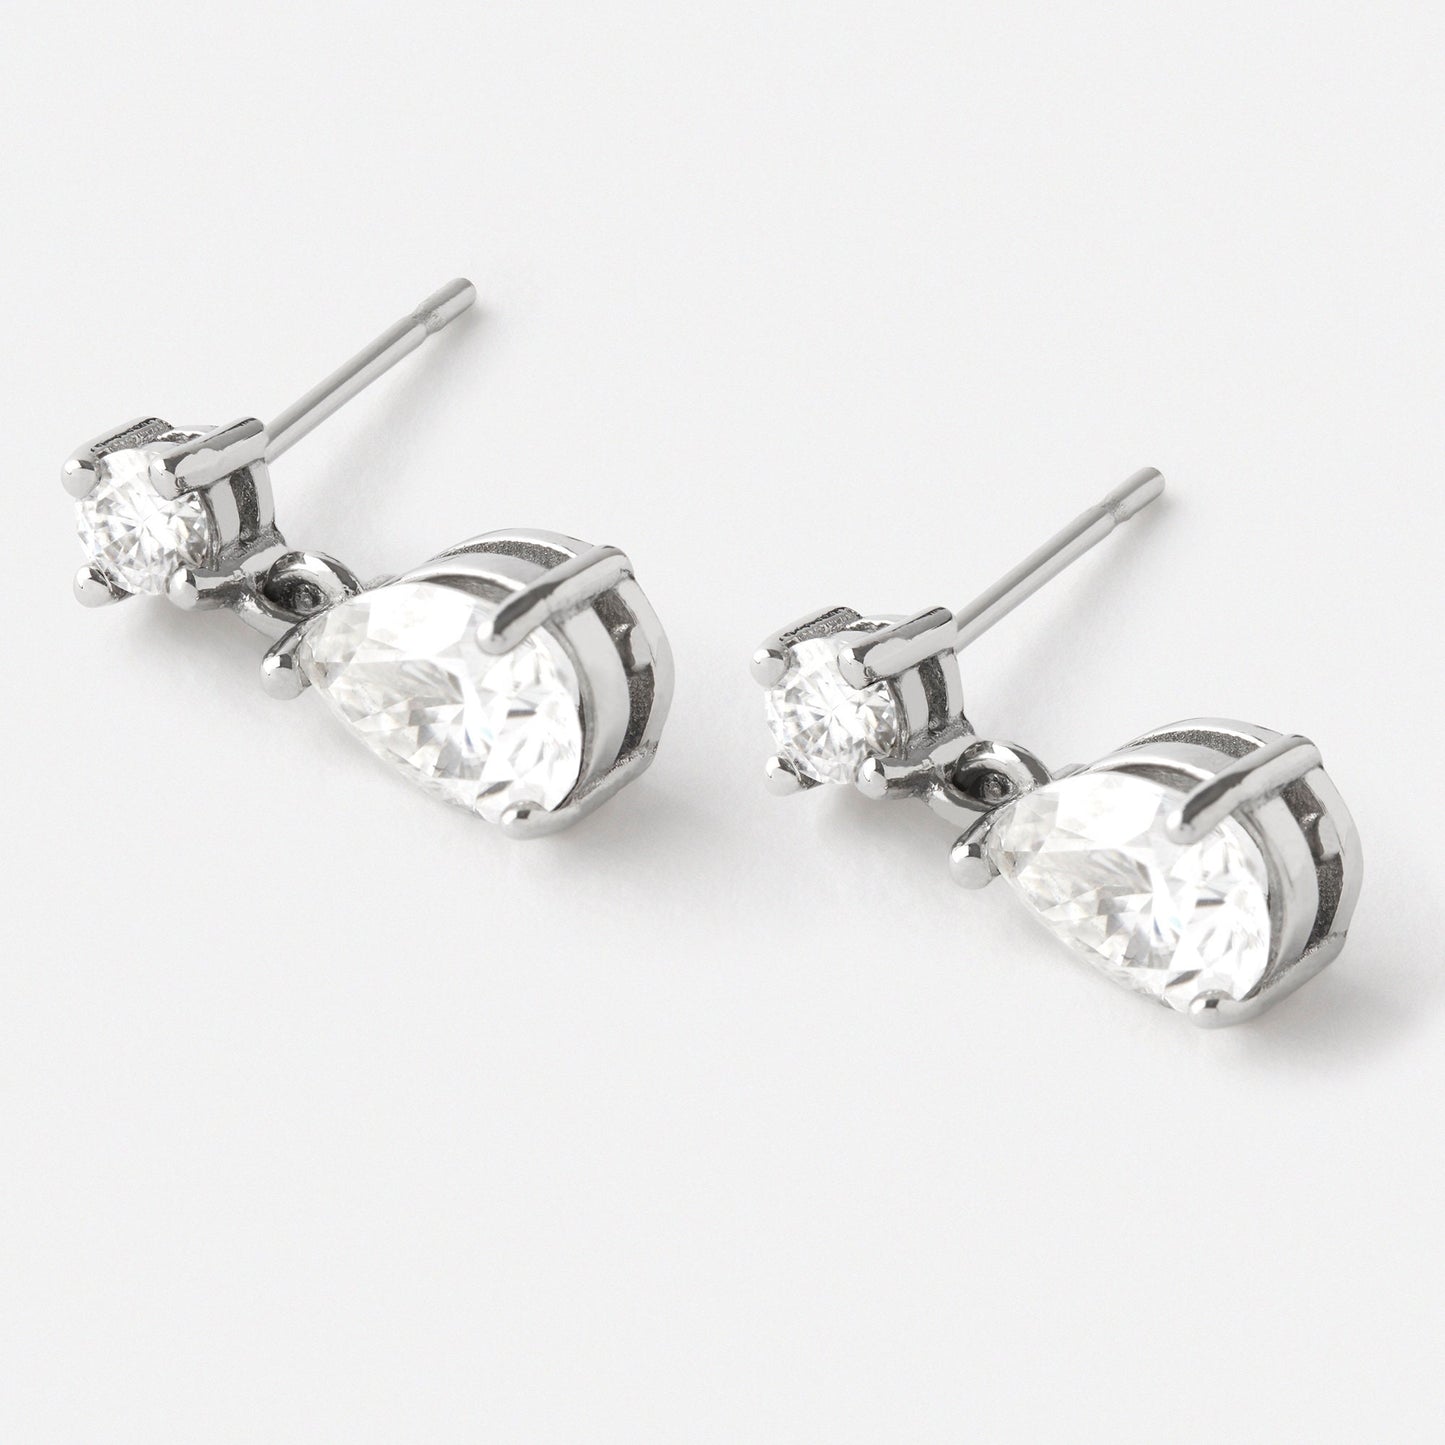 GENUINE Moissanite Pear stud earrings, available in titanium, white gold and surgical steel